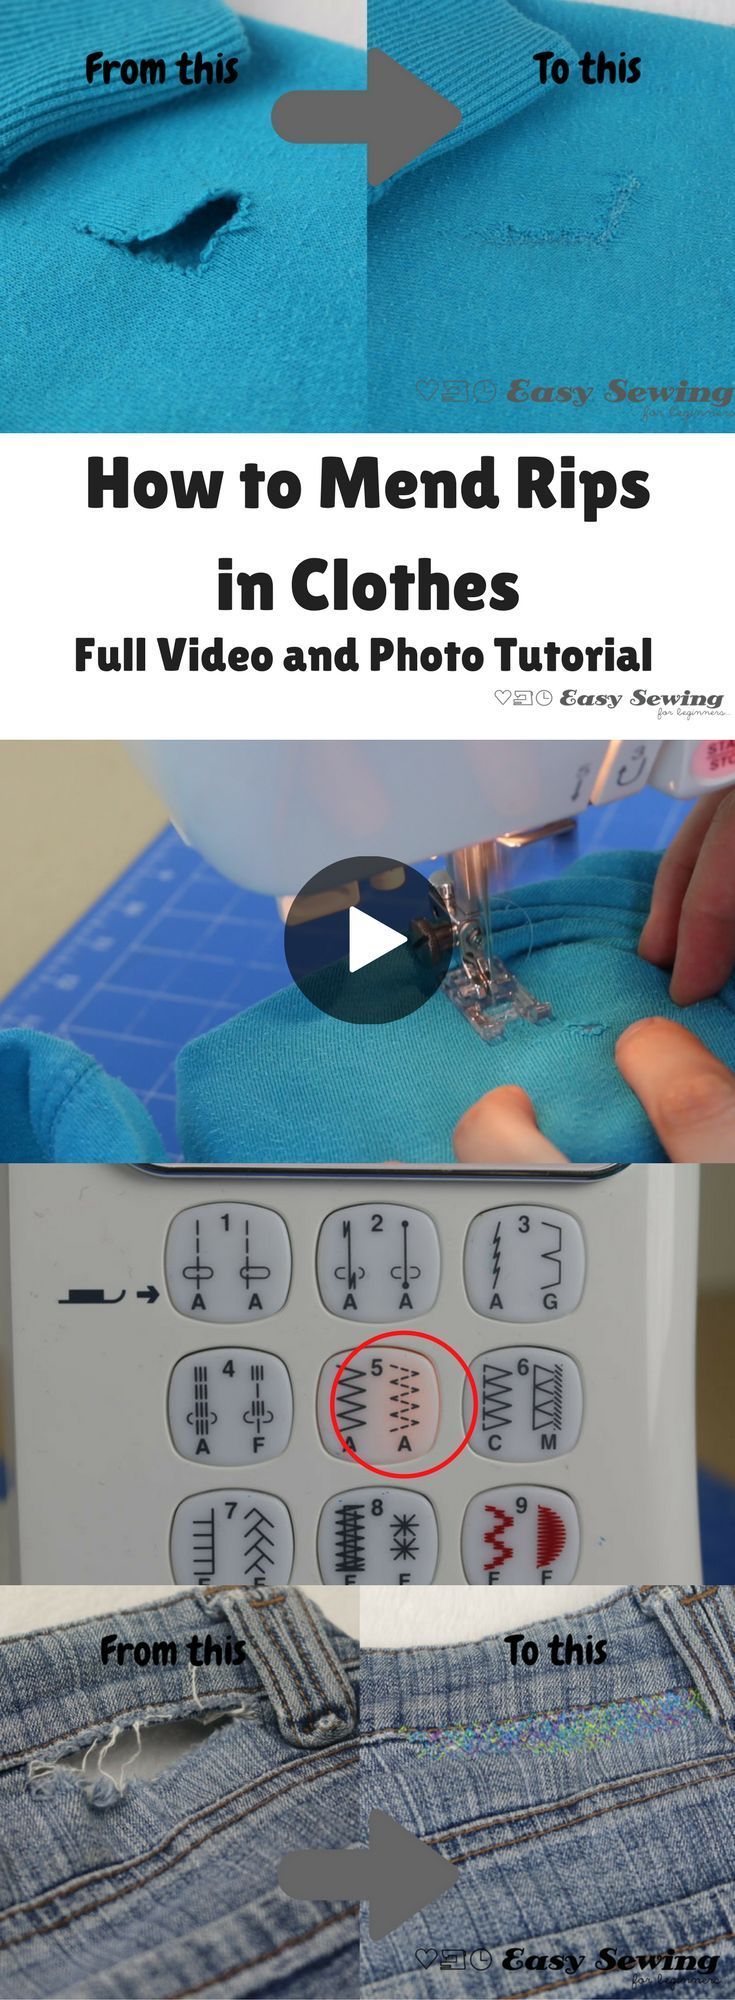 How to mend rips in clothes with a full video and photo tutorial! Handy to know.